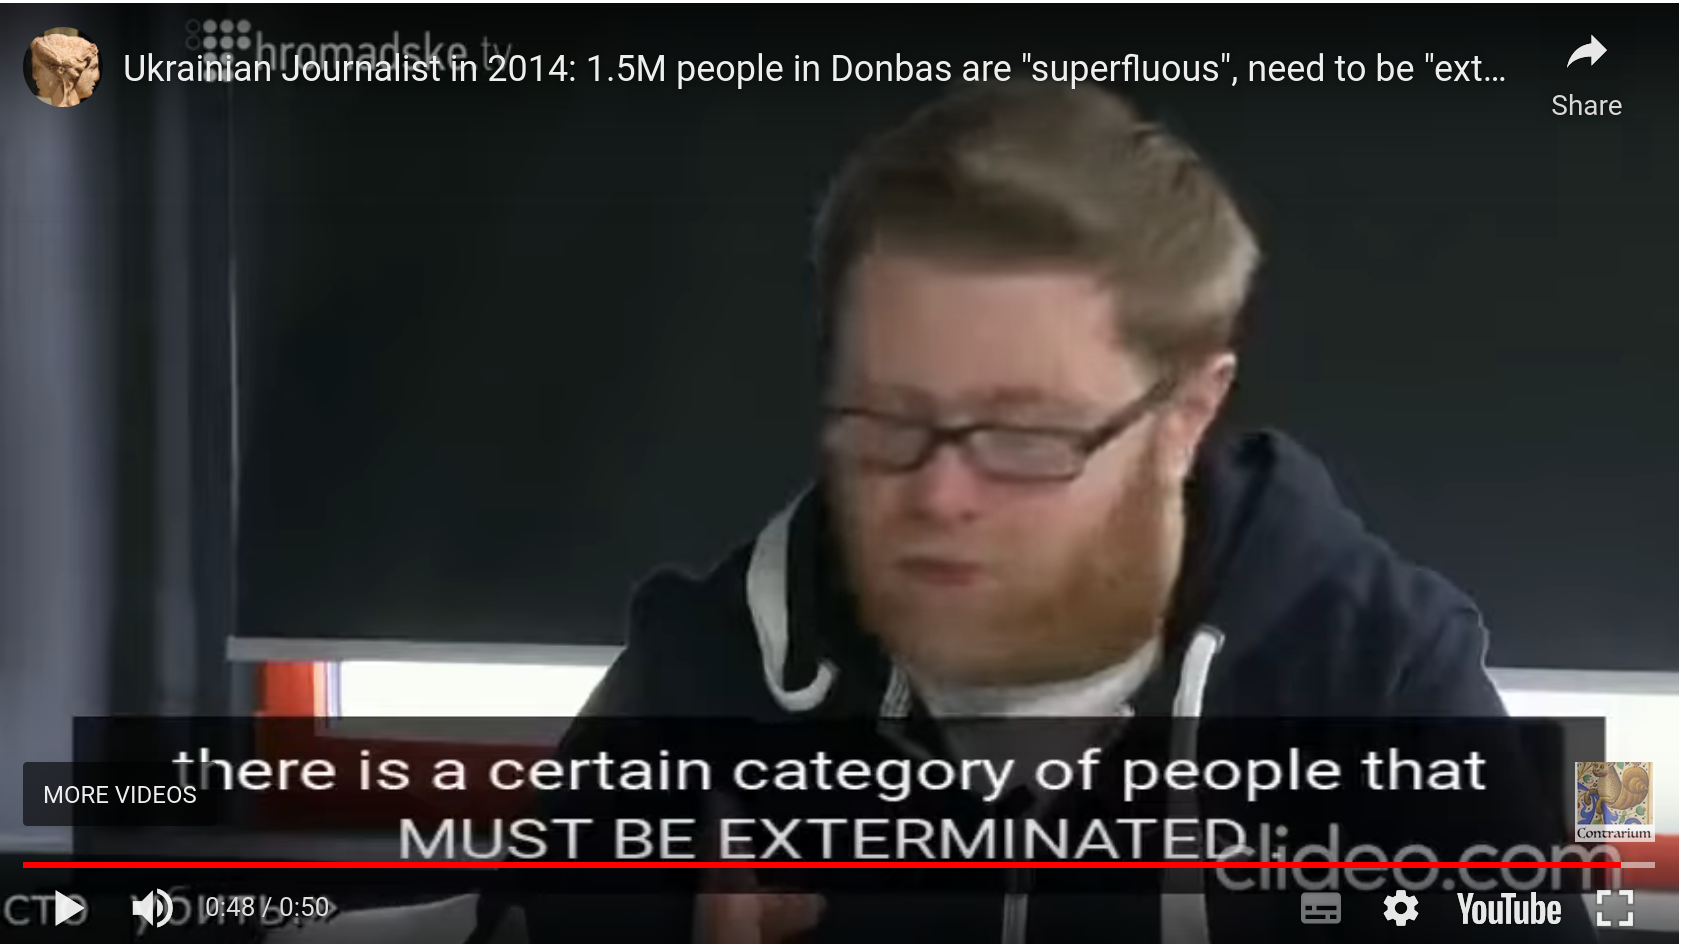 Ukrainian Journalist in 2014: “1.5m people in Donbas are superfluous”